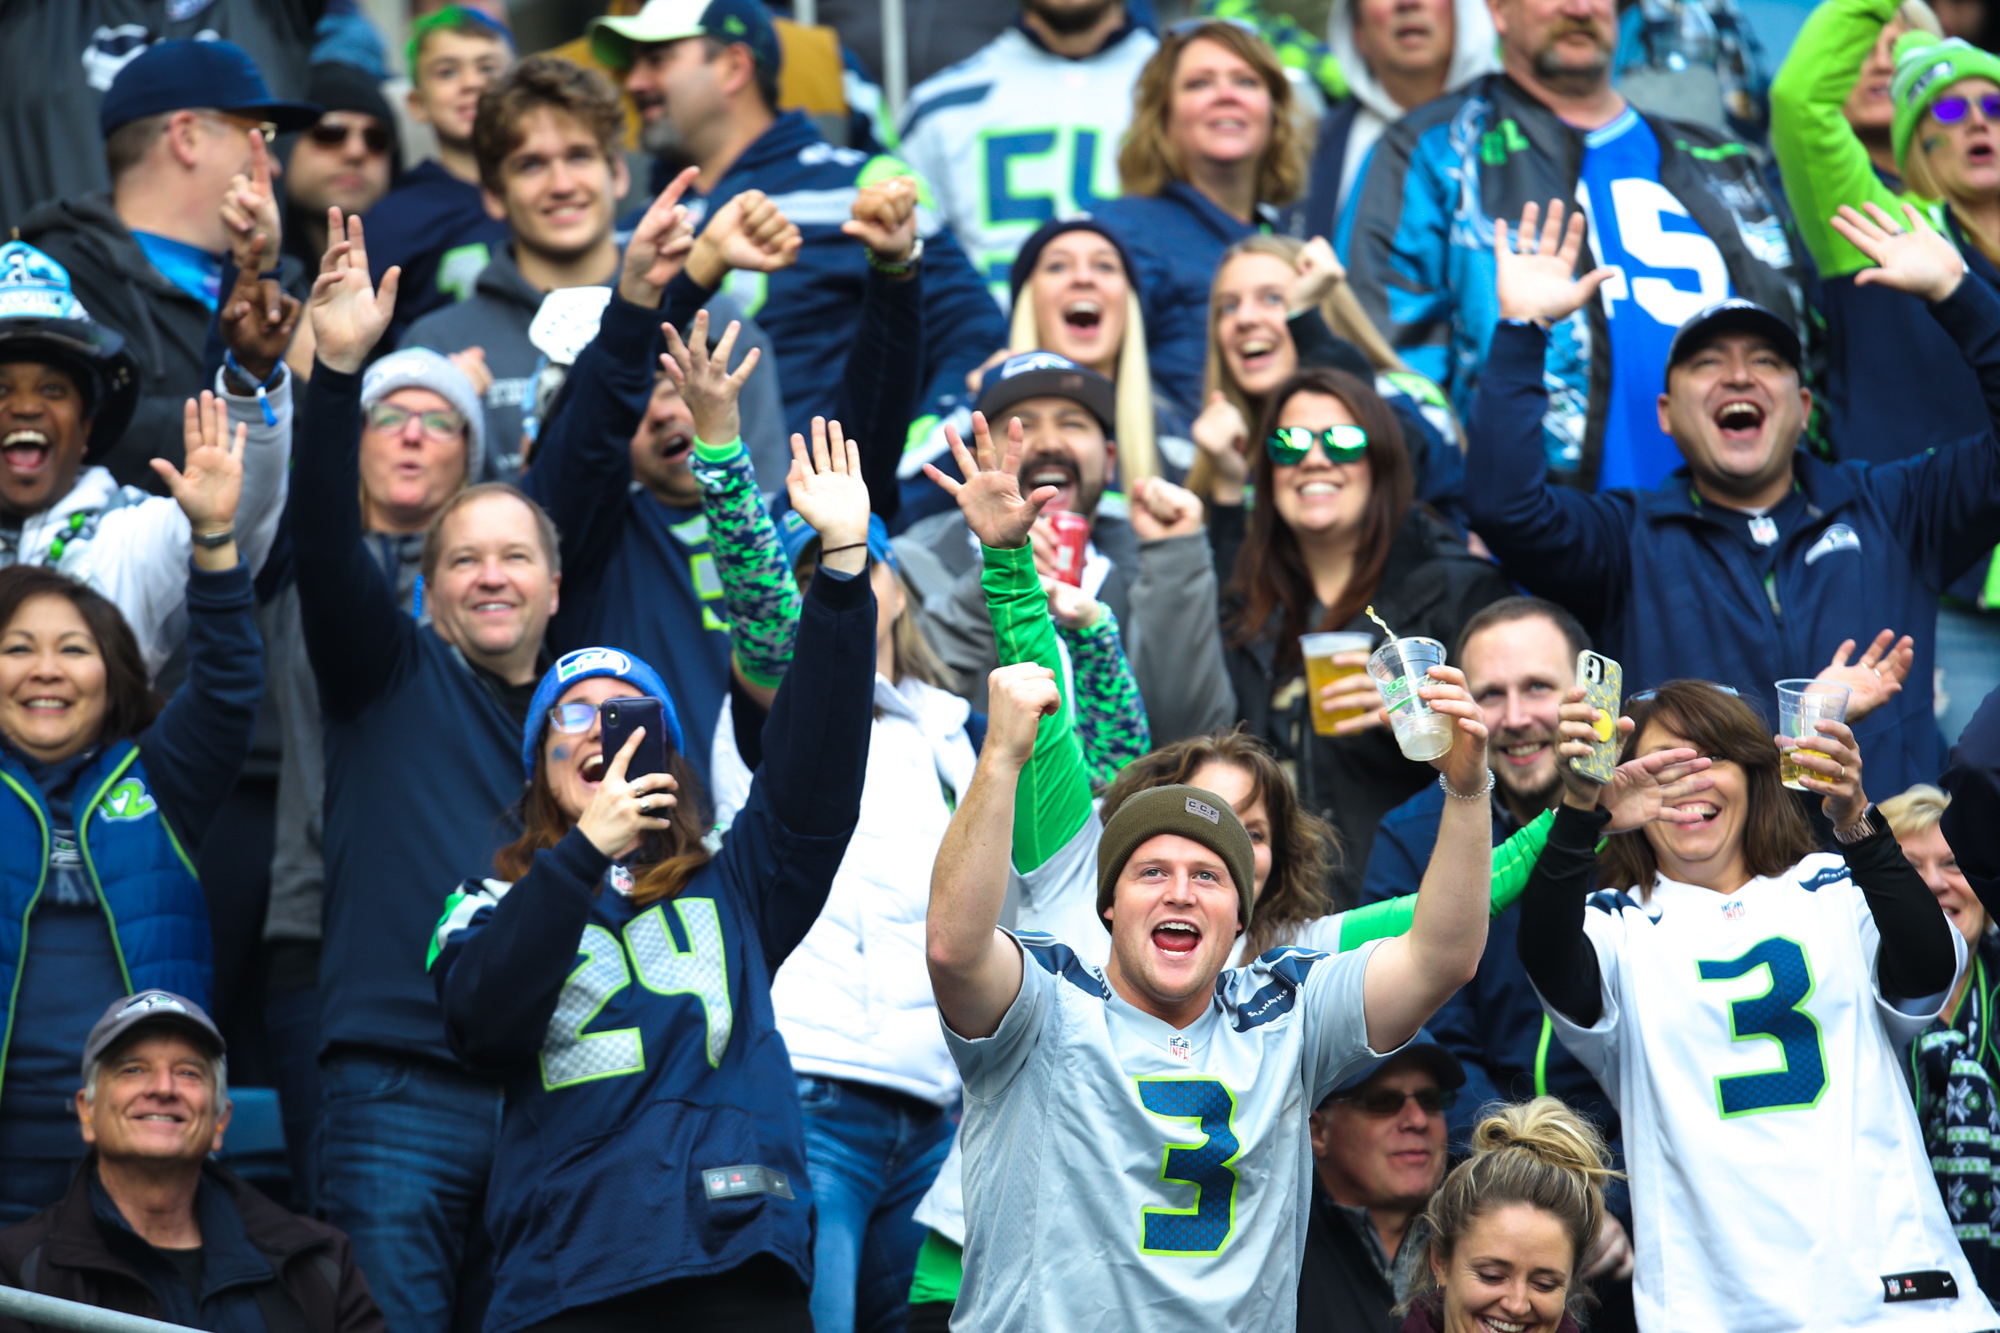 'Bring back the noise': Seattle's Lumen Field to return to full capacity for Seahawks games